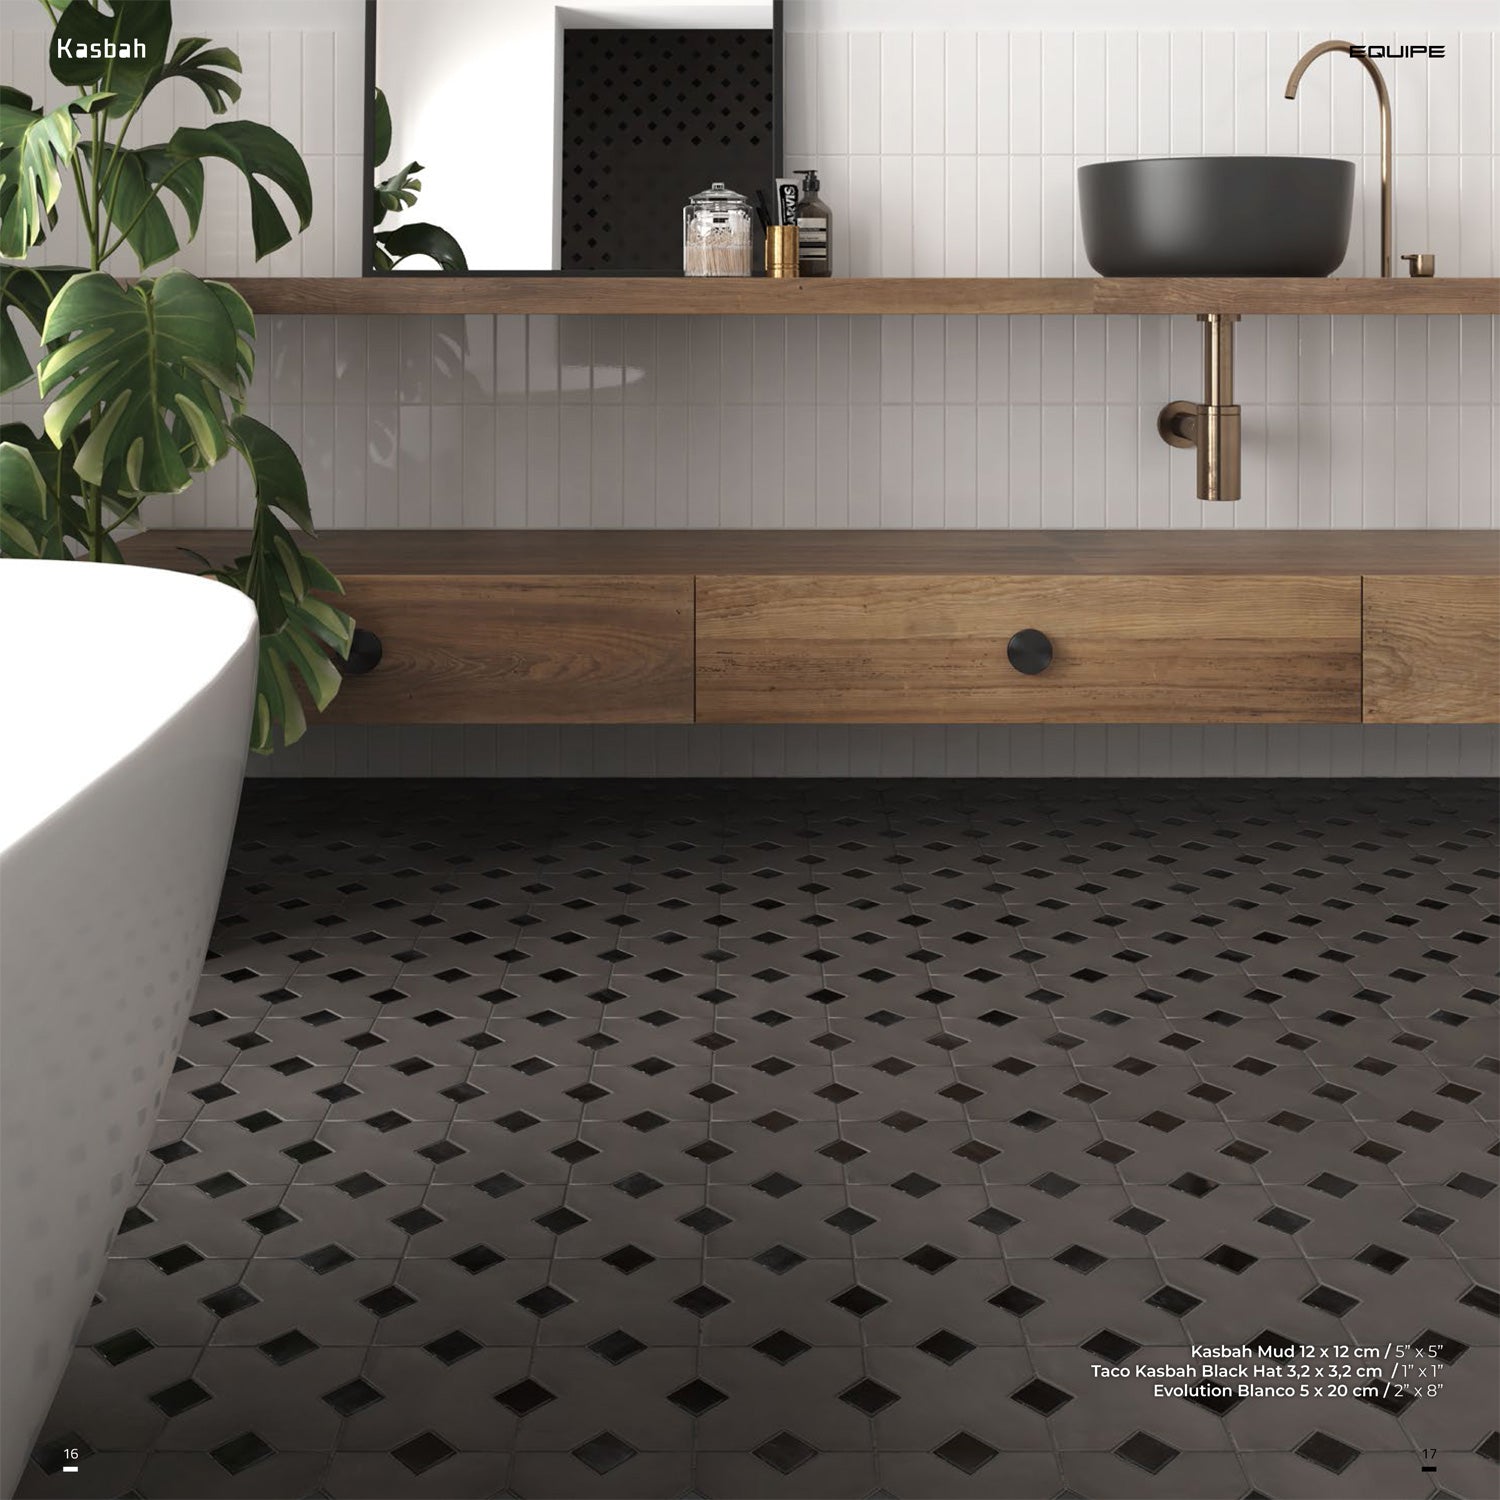 Equipe - Kasbah Collection - 1 in. x 1 in. Porcelain Tile - Black Hat Gloss